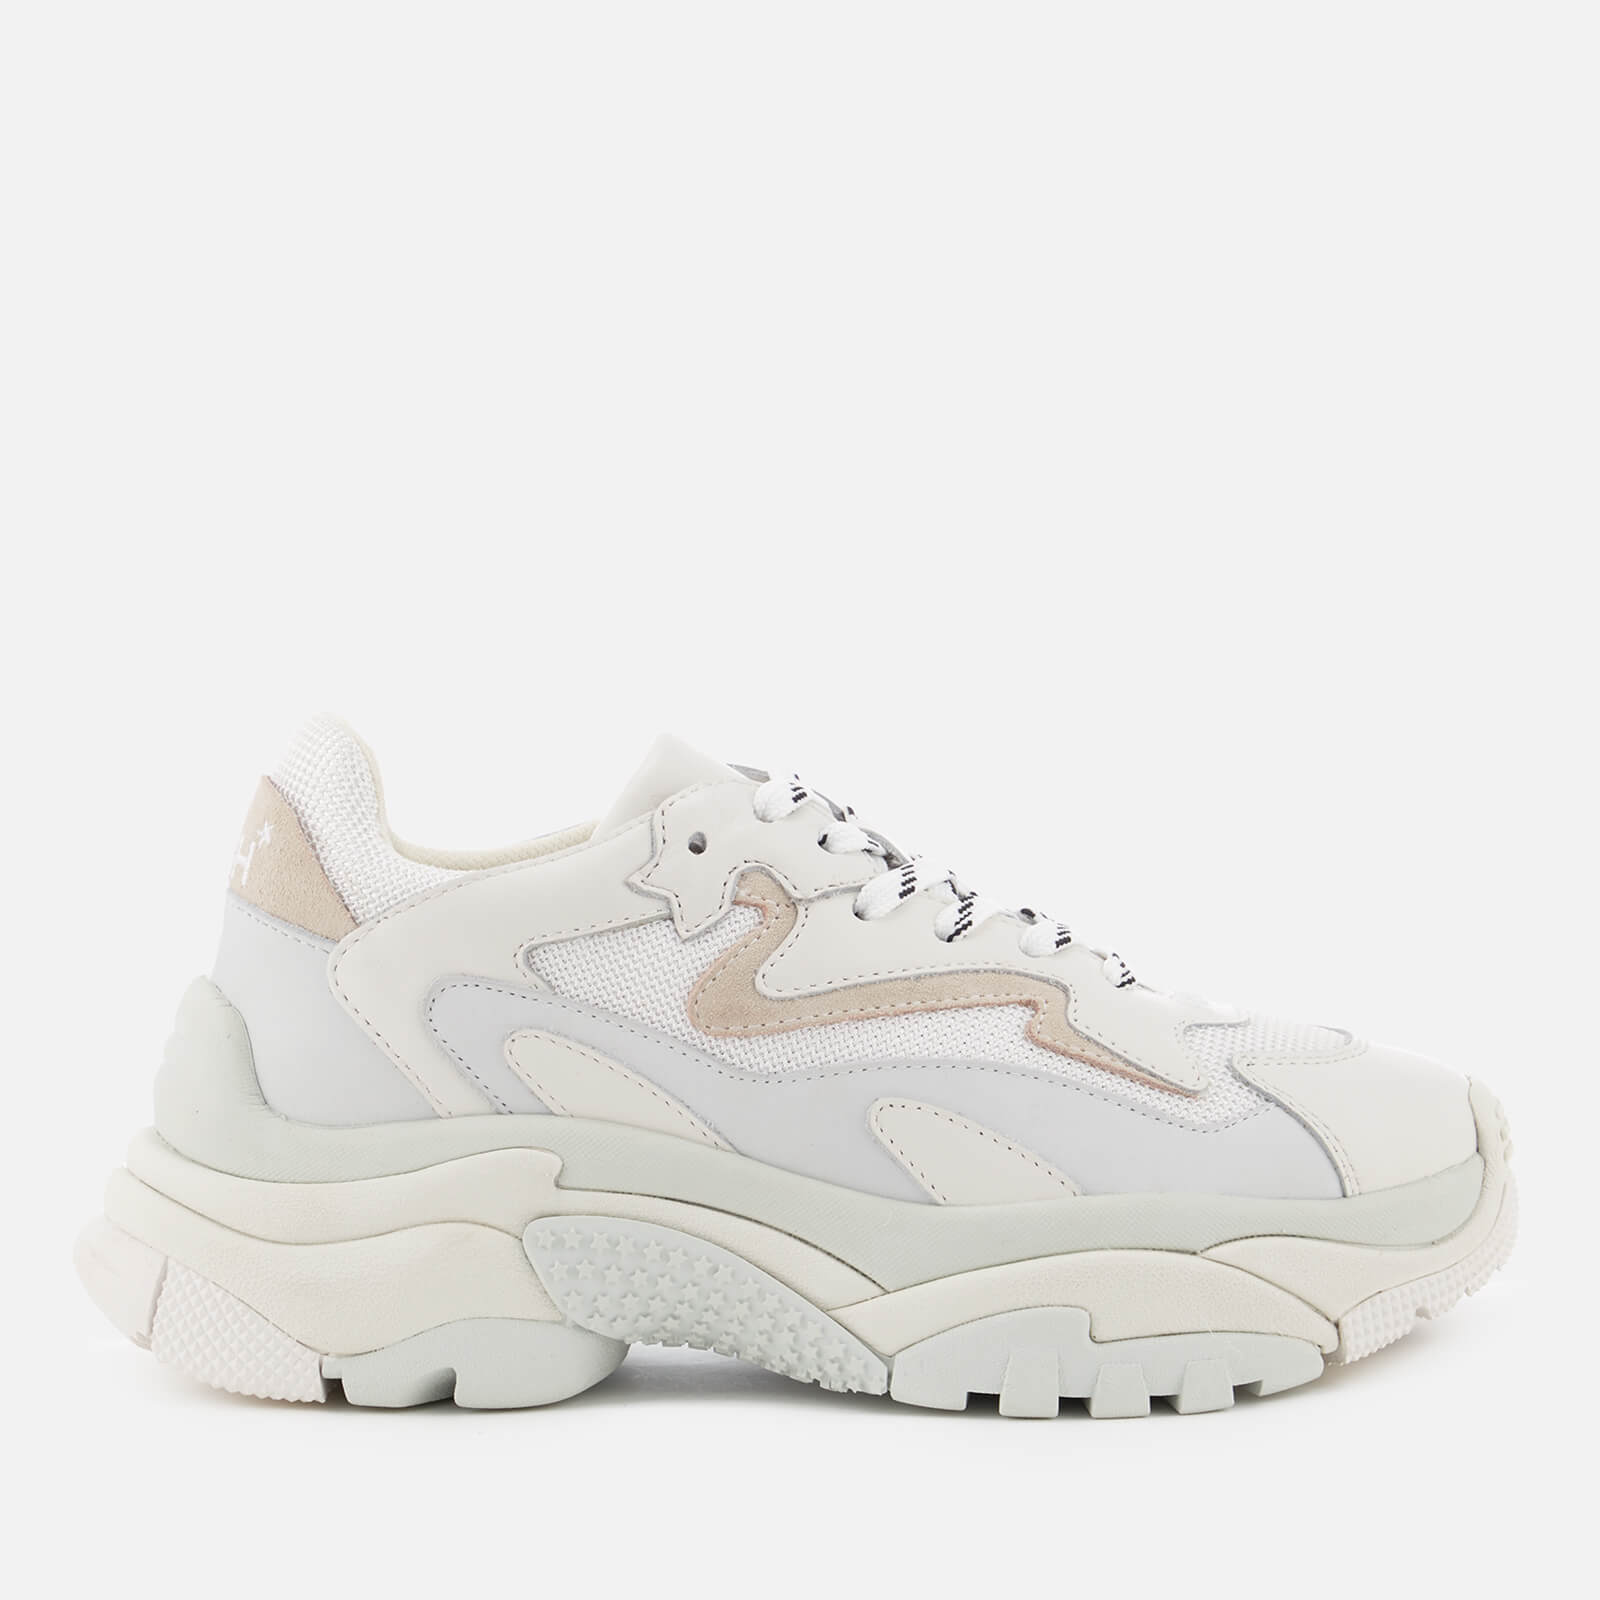 Ash Women's Addict Chunky Running Style Trainers - Off White/White - UK 8 product